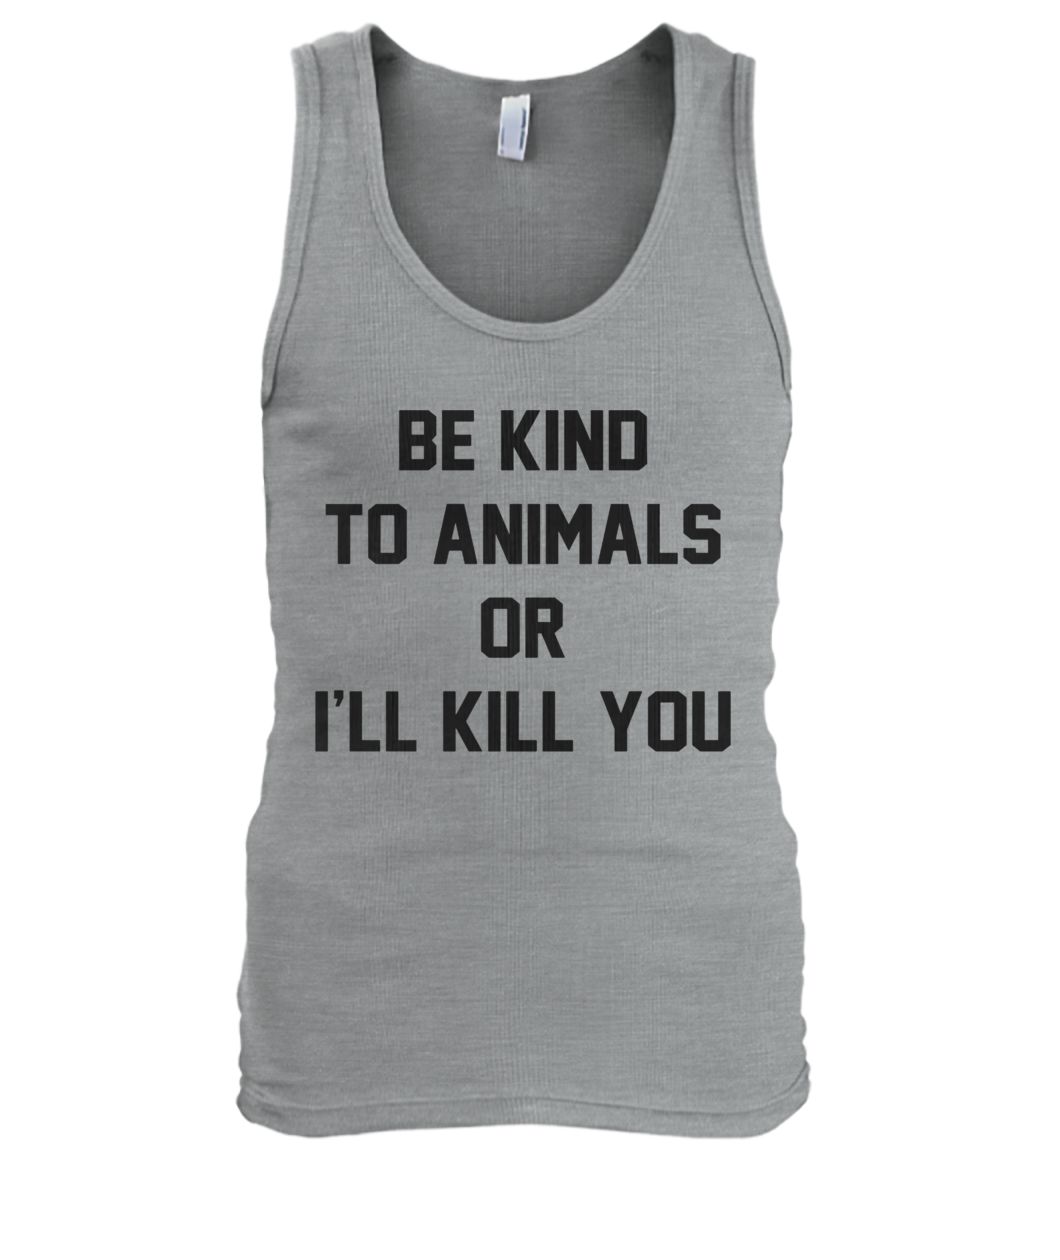 Be kind to animals or I'll kill you animal rights men's tank top